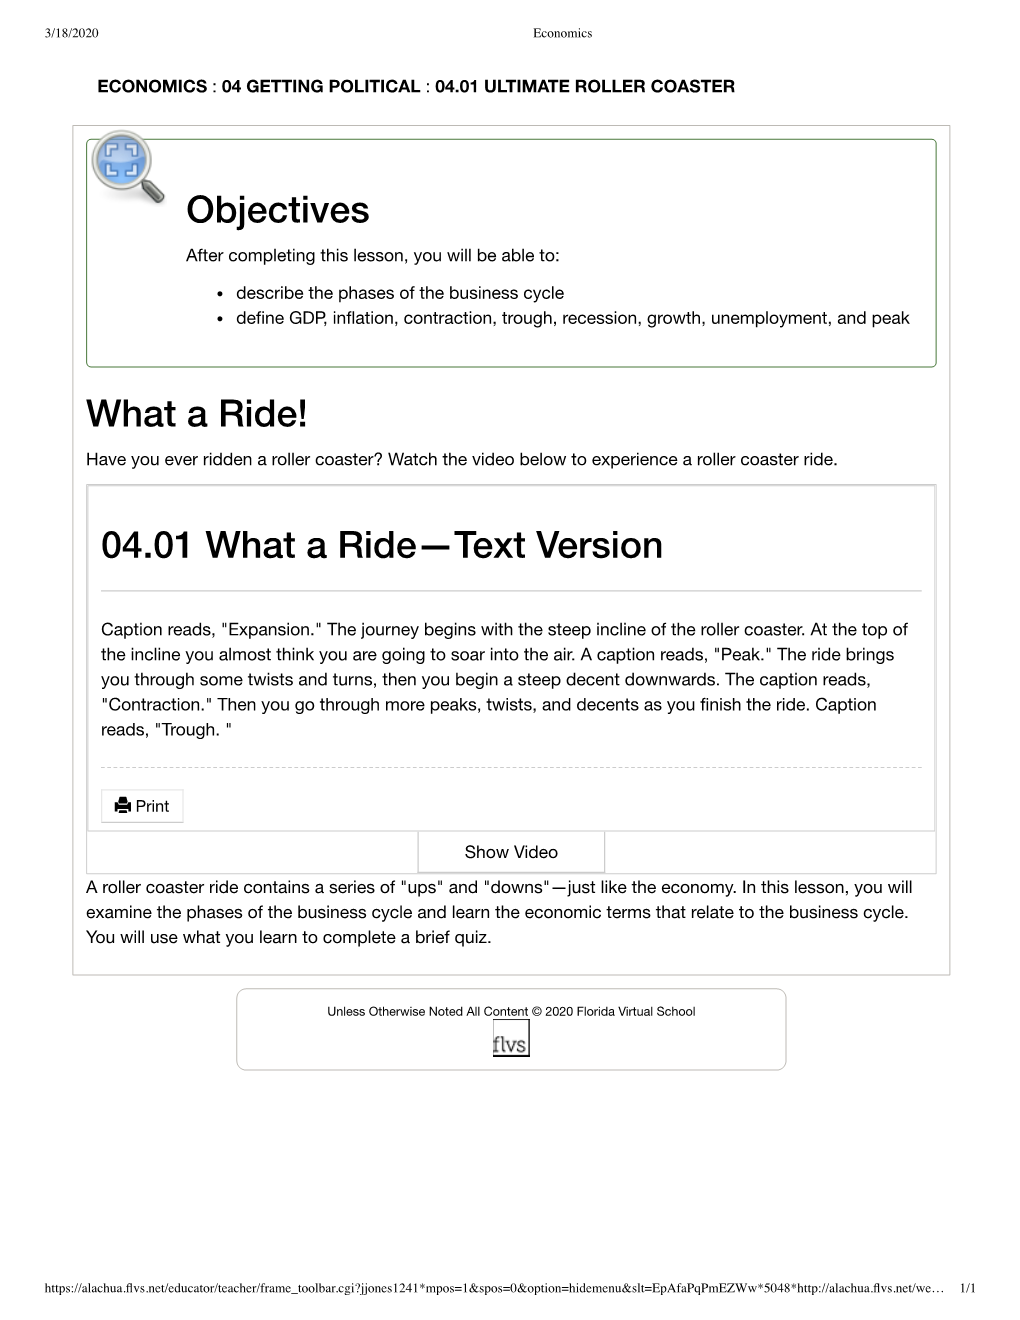 Objectives 04.01 What a Ride—Text Version